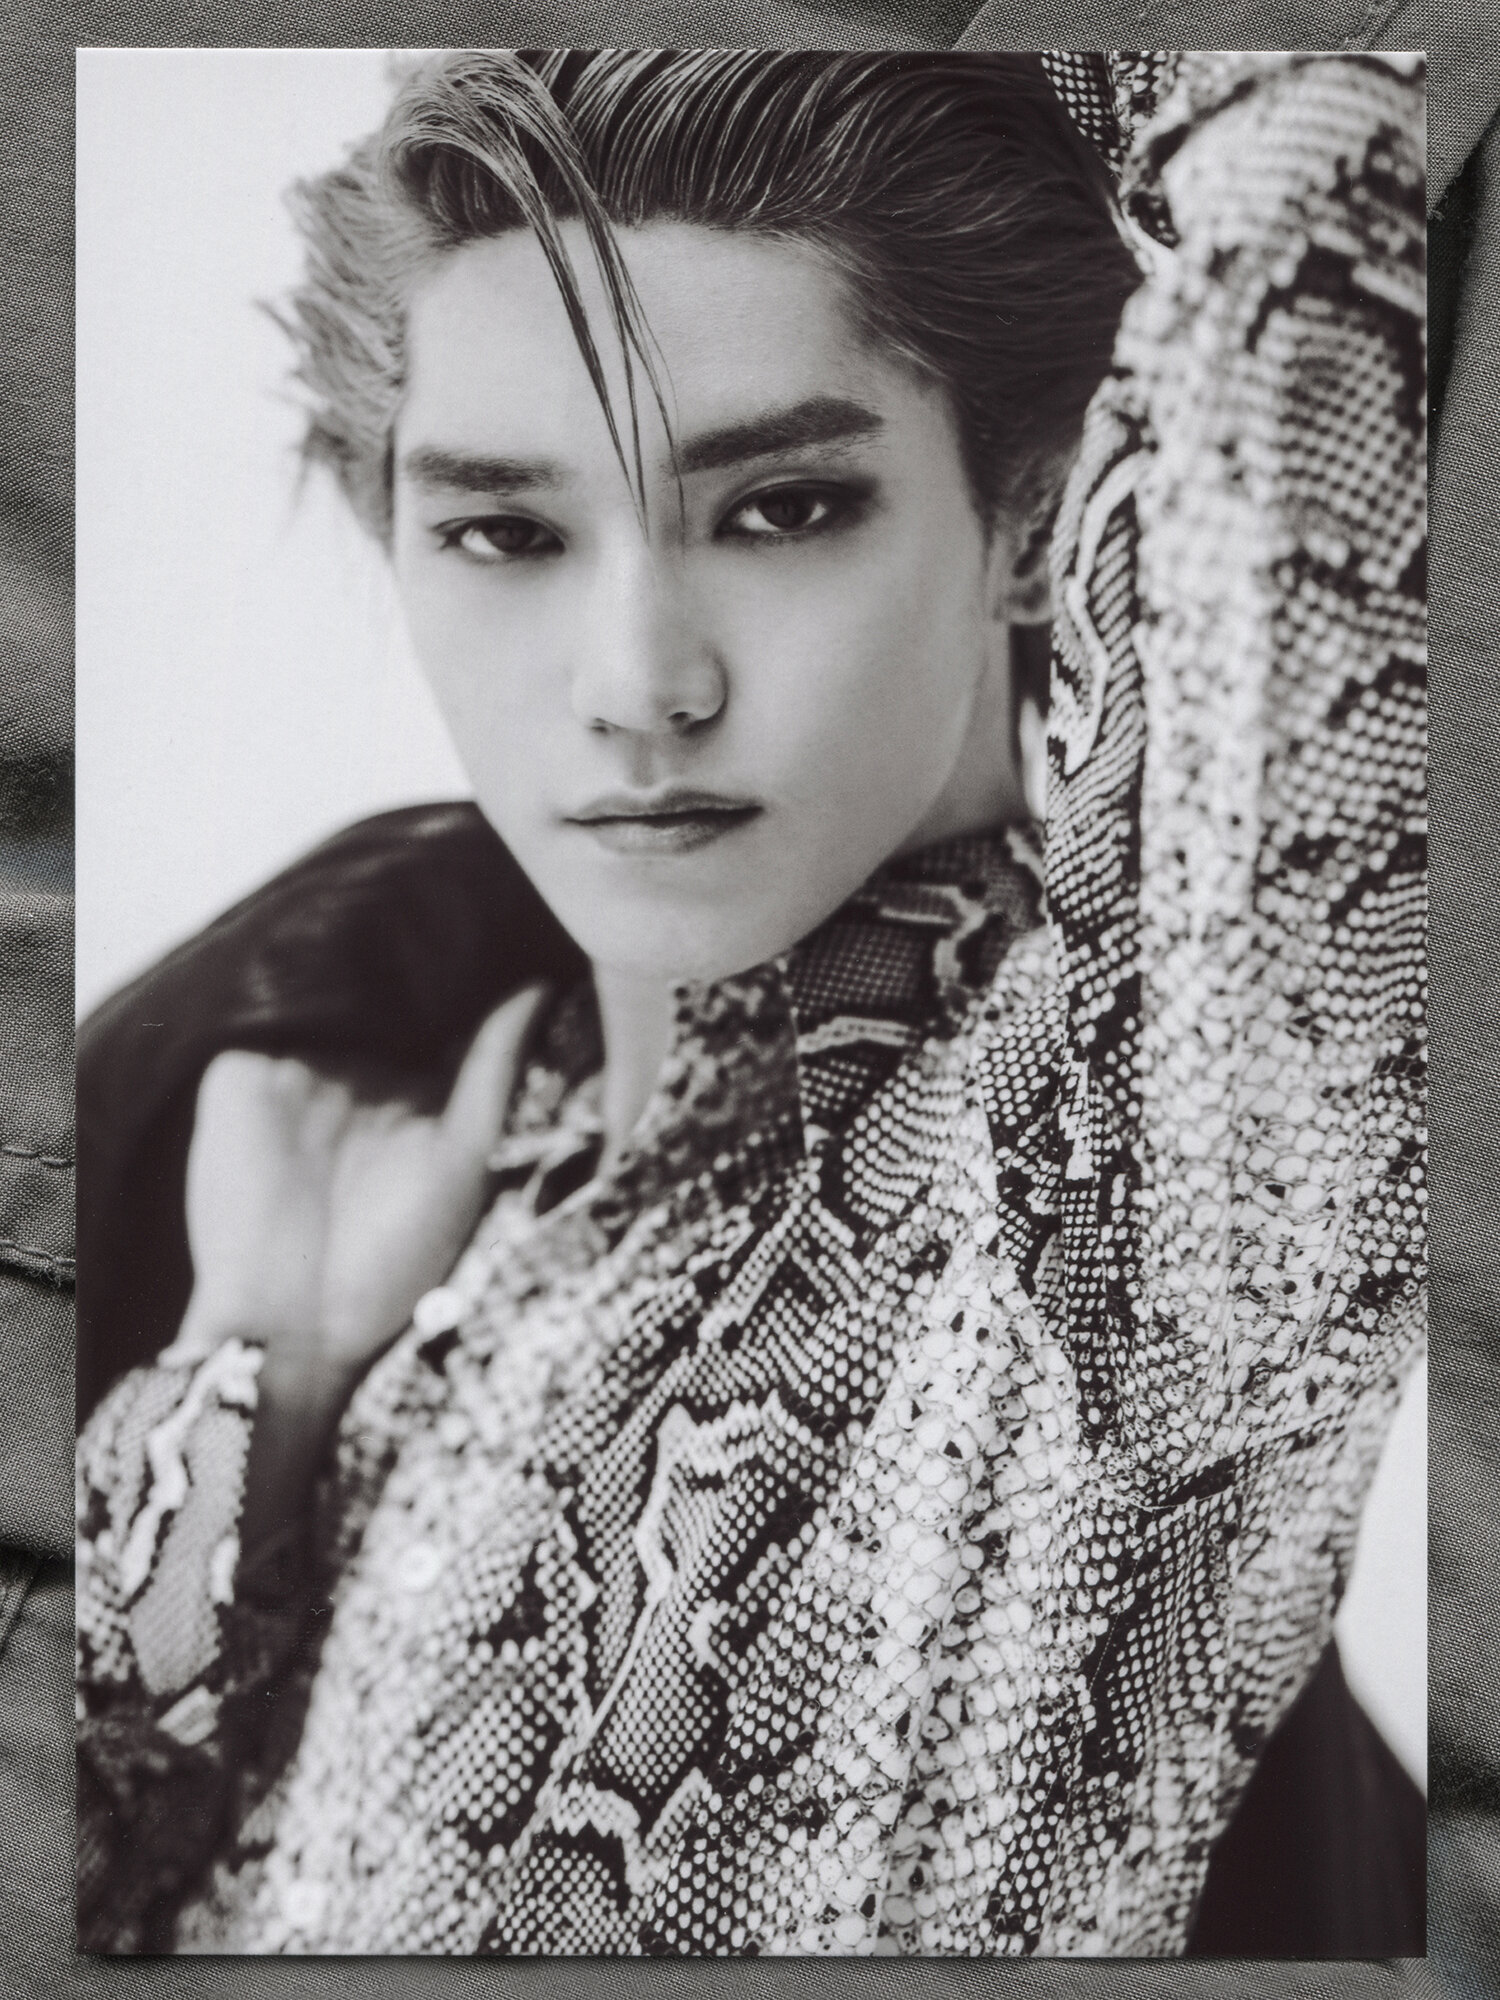 Taeyong wears TOM FORD leather jacket and shirt. GIVENCHY pants.